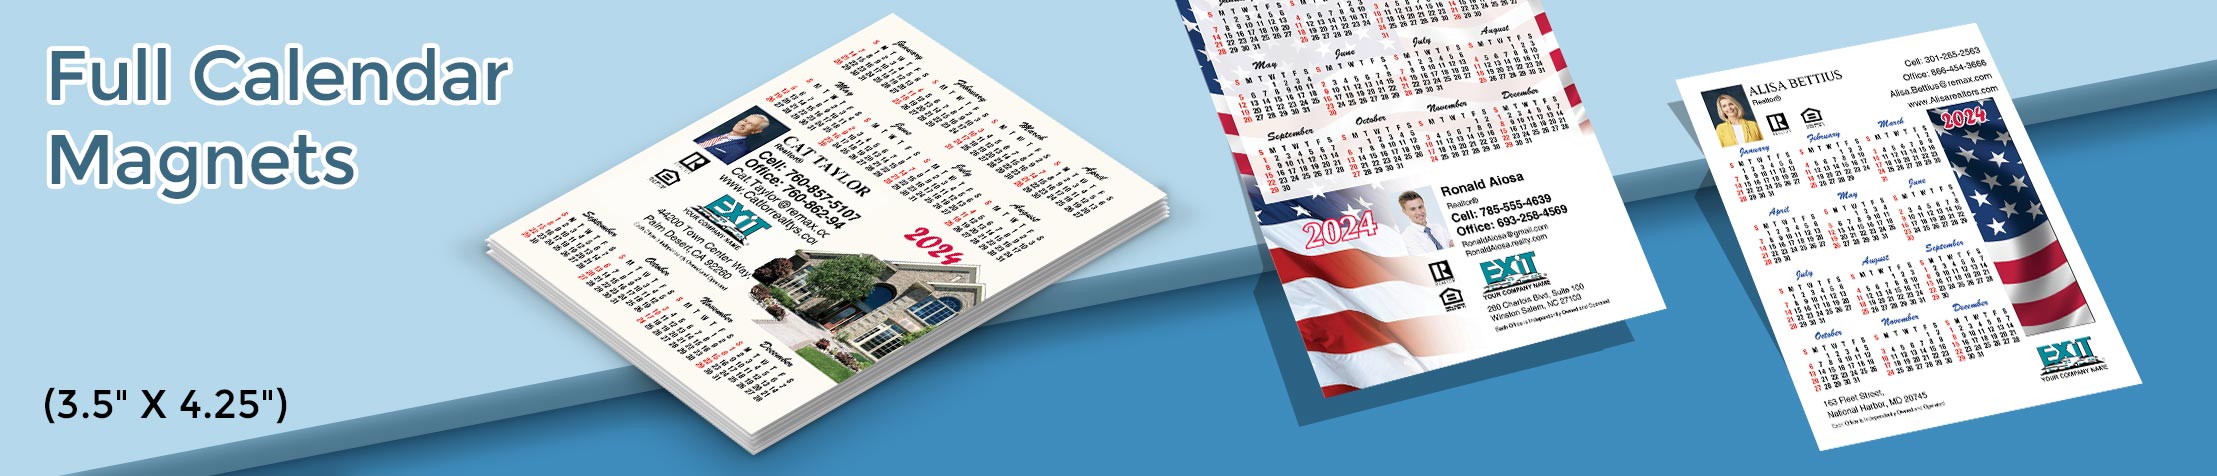 Exit Realty Full Calendar Magnets - Exit Realty approved vendor 2019 calendars, 3.5” by 4.25” | BestPrintBuy.com